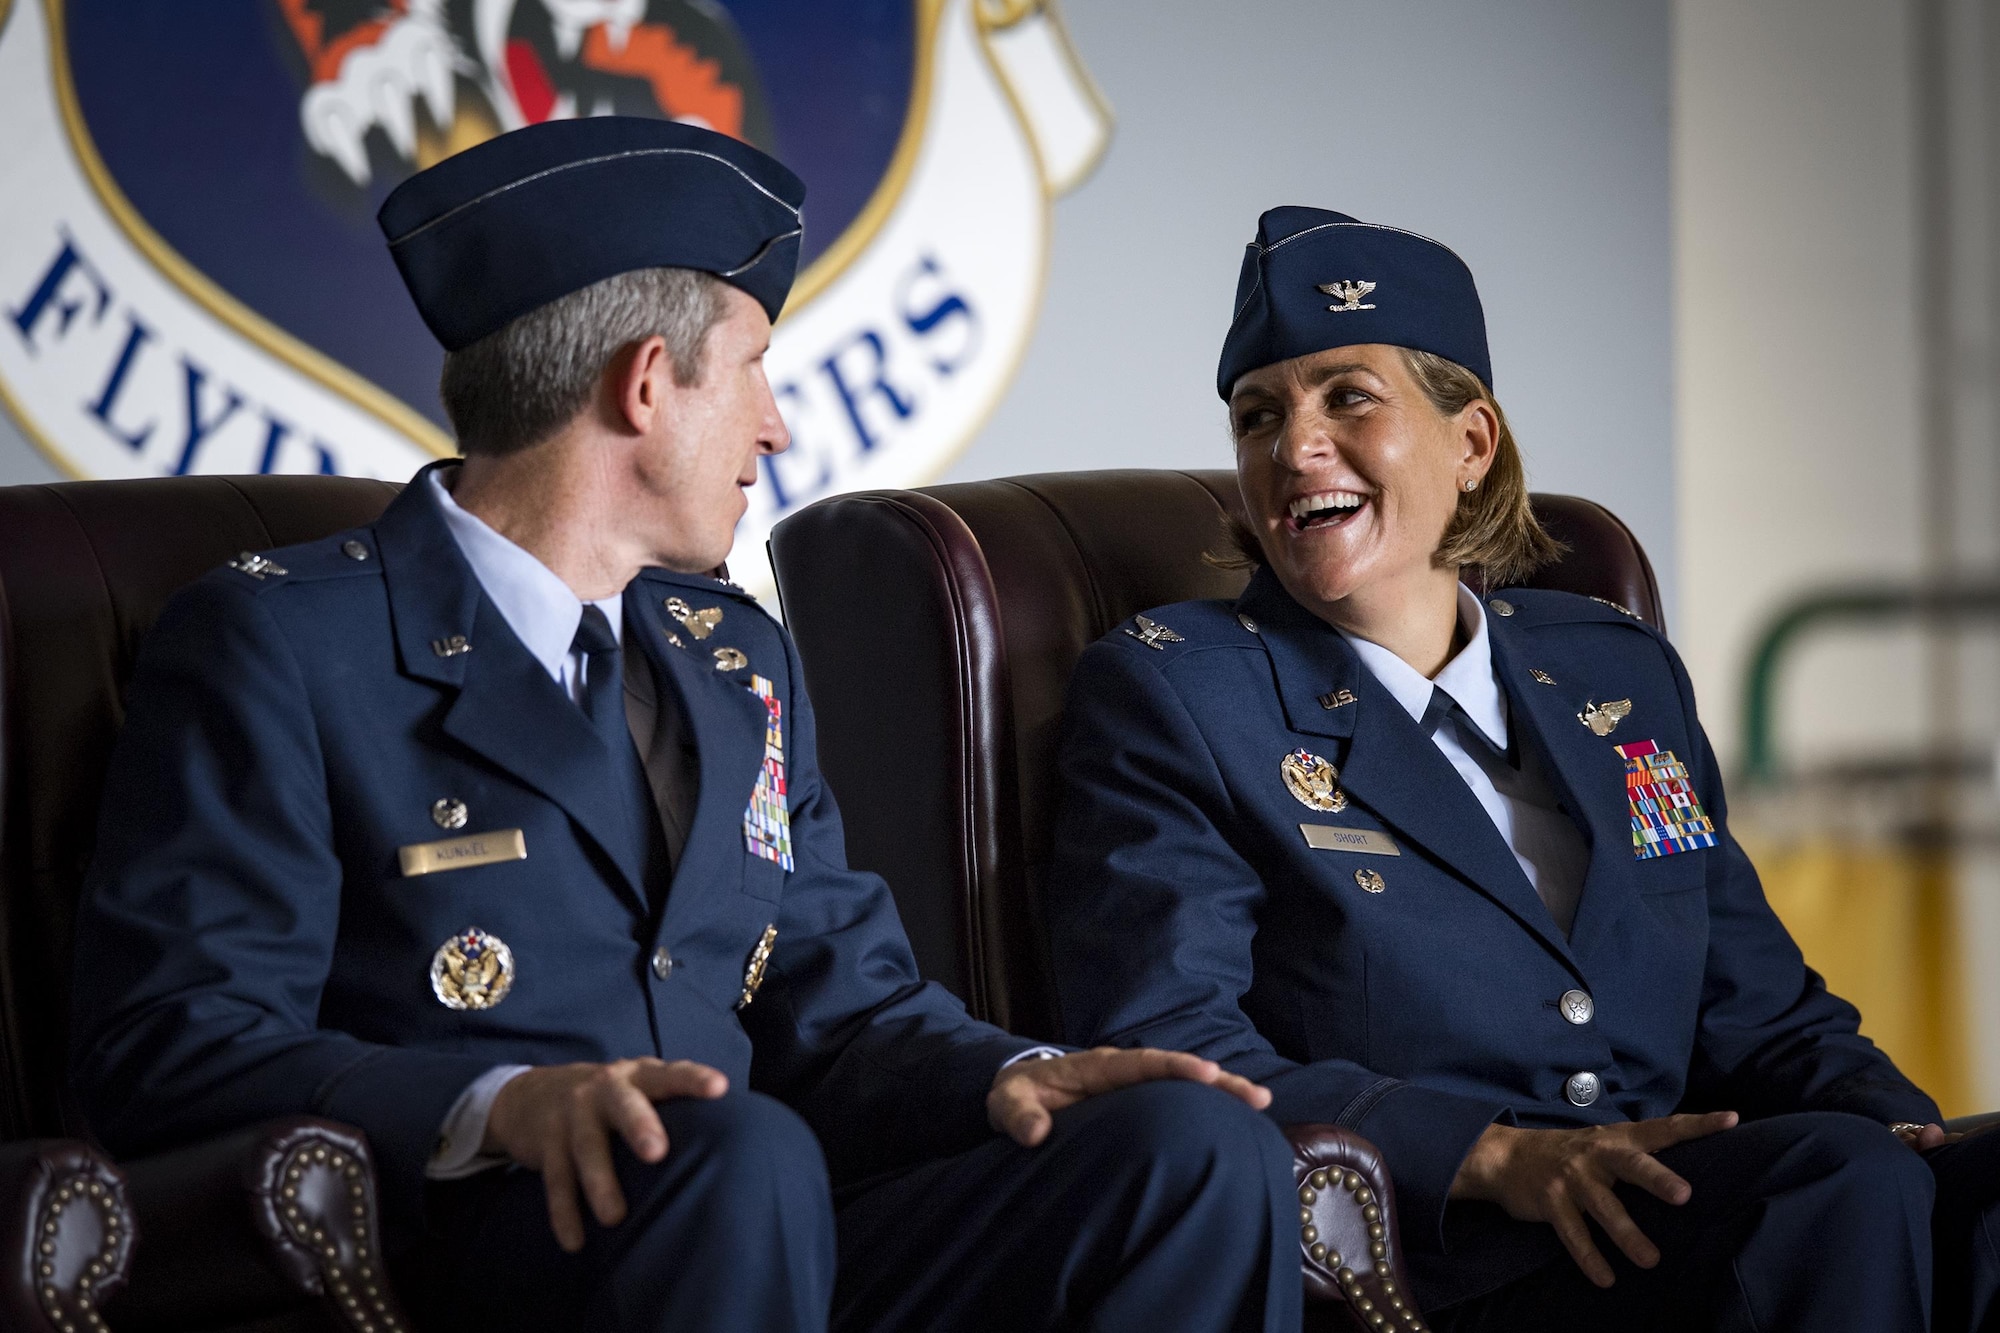 Col. Jennifer Short, right, 23d Wing commander, shares a laugh with Col. Thomas Kunkel, outgoing 23d Wing commander, during a change of command ceremony, July 10, 2017, at Moody Air Force Base, Ga. Short is a senior pilot with more than 1,800 hours flying A-10 and trainer aircraft, and before becoming a pilot, she served as a C-130E Hercules Navigator. (U.S. Air Force photo by Staff Sgt. Ryan Callaghan)